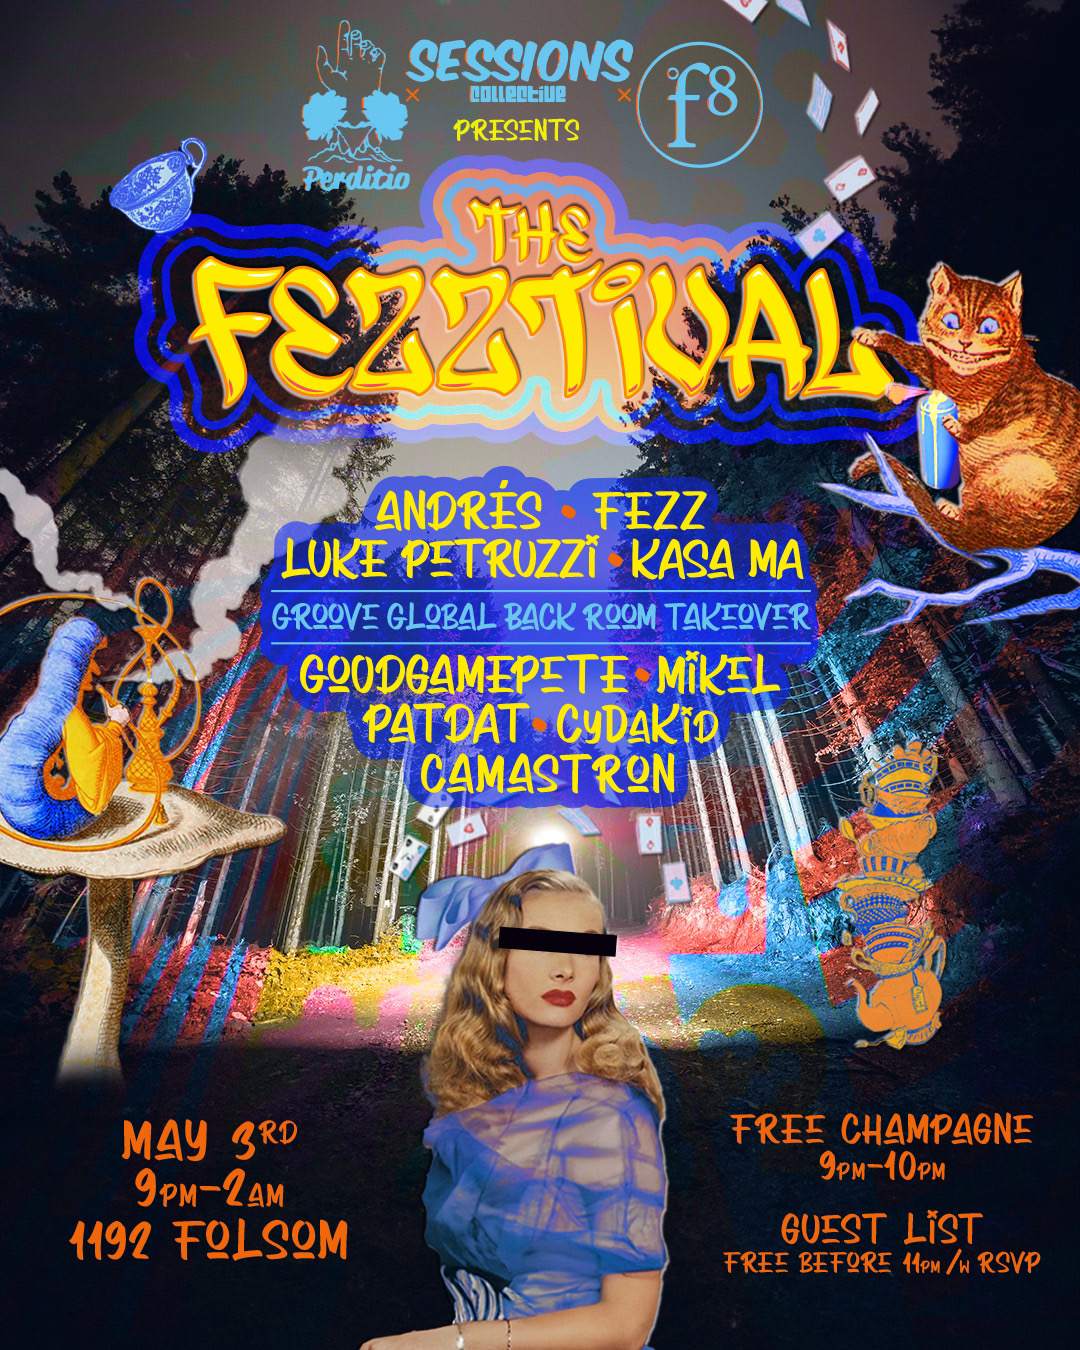 THE FEZZTIVAL presented by Sessions Collective x Perditio x F8 - フライヤー表